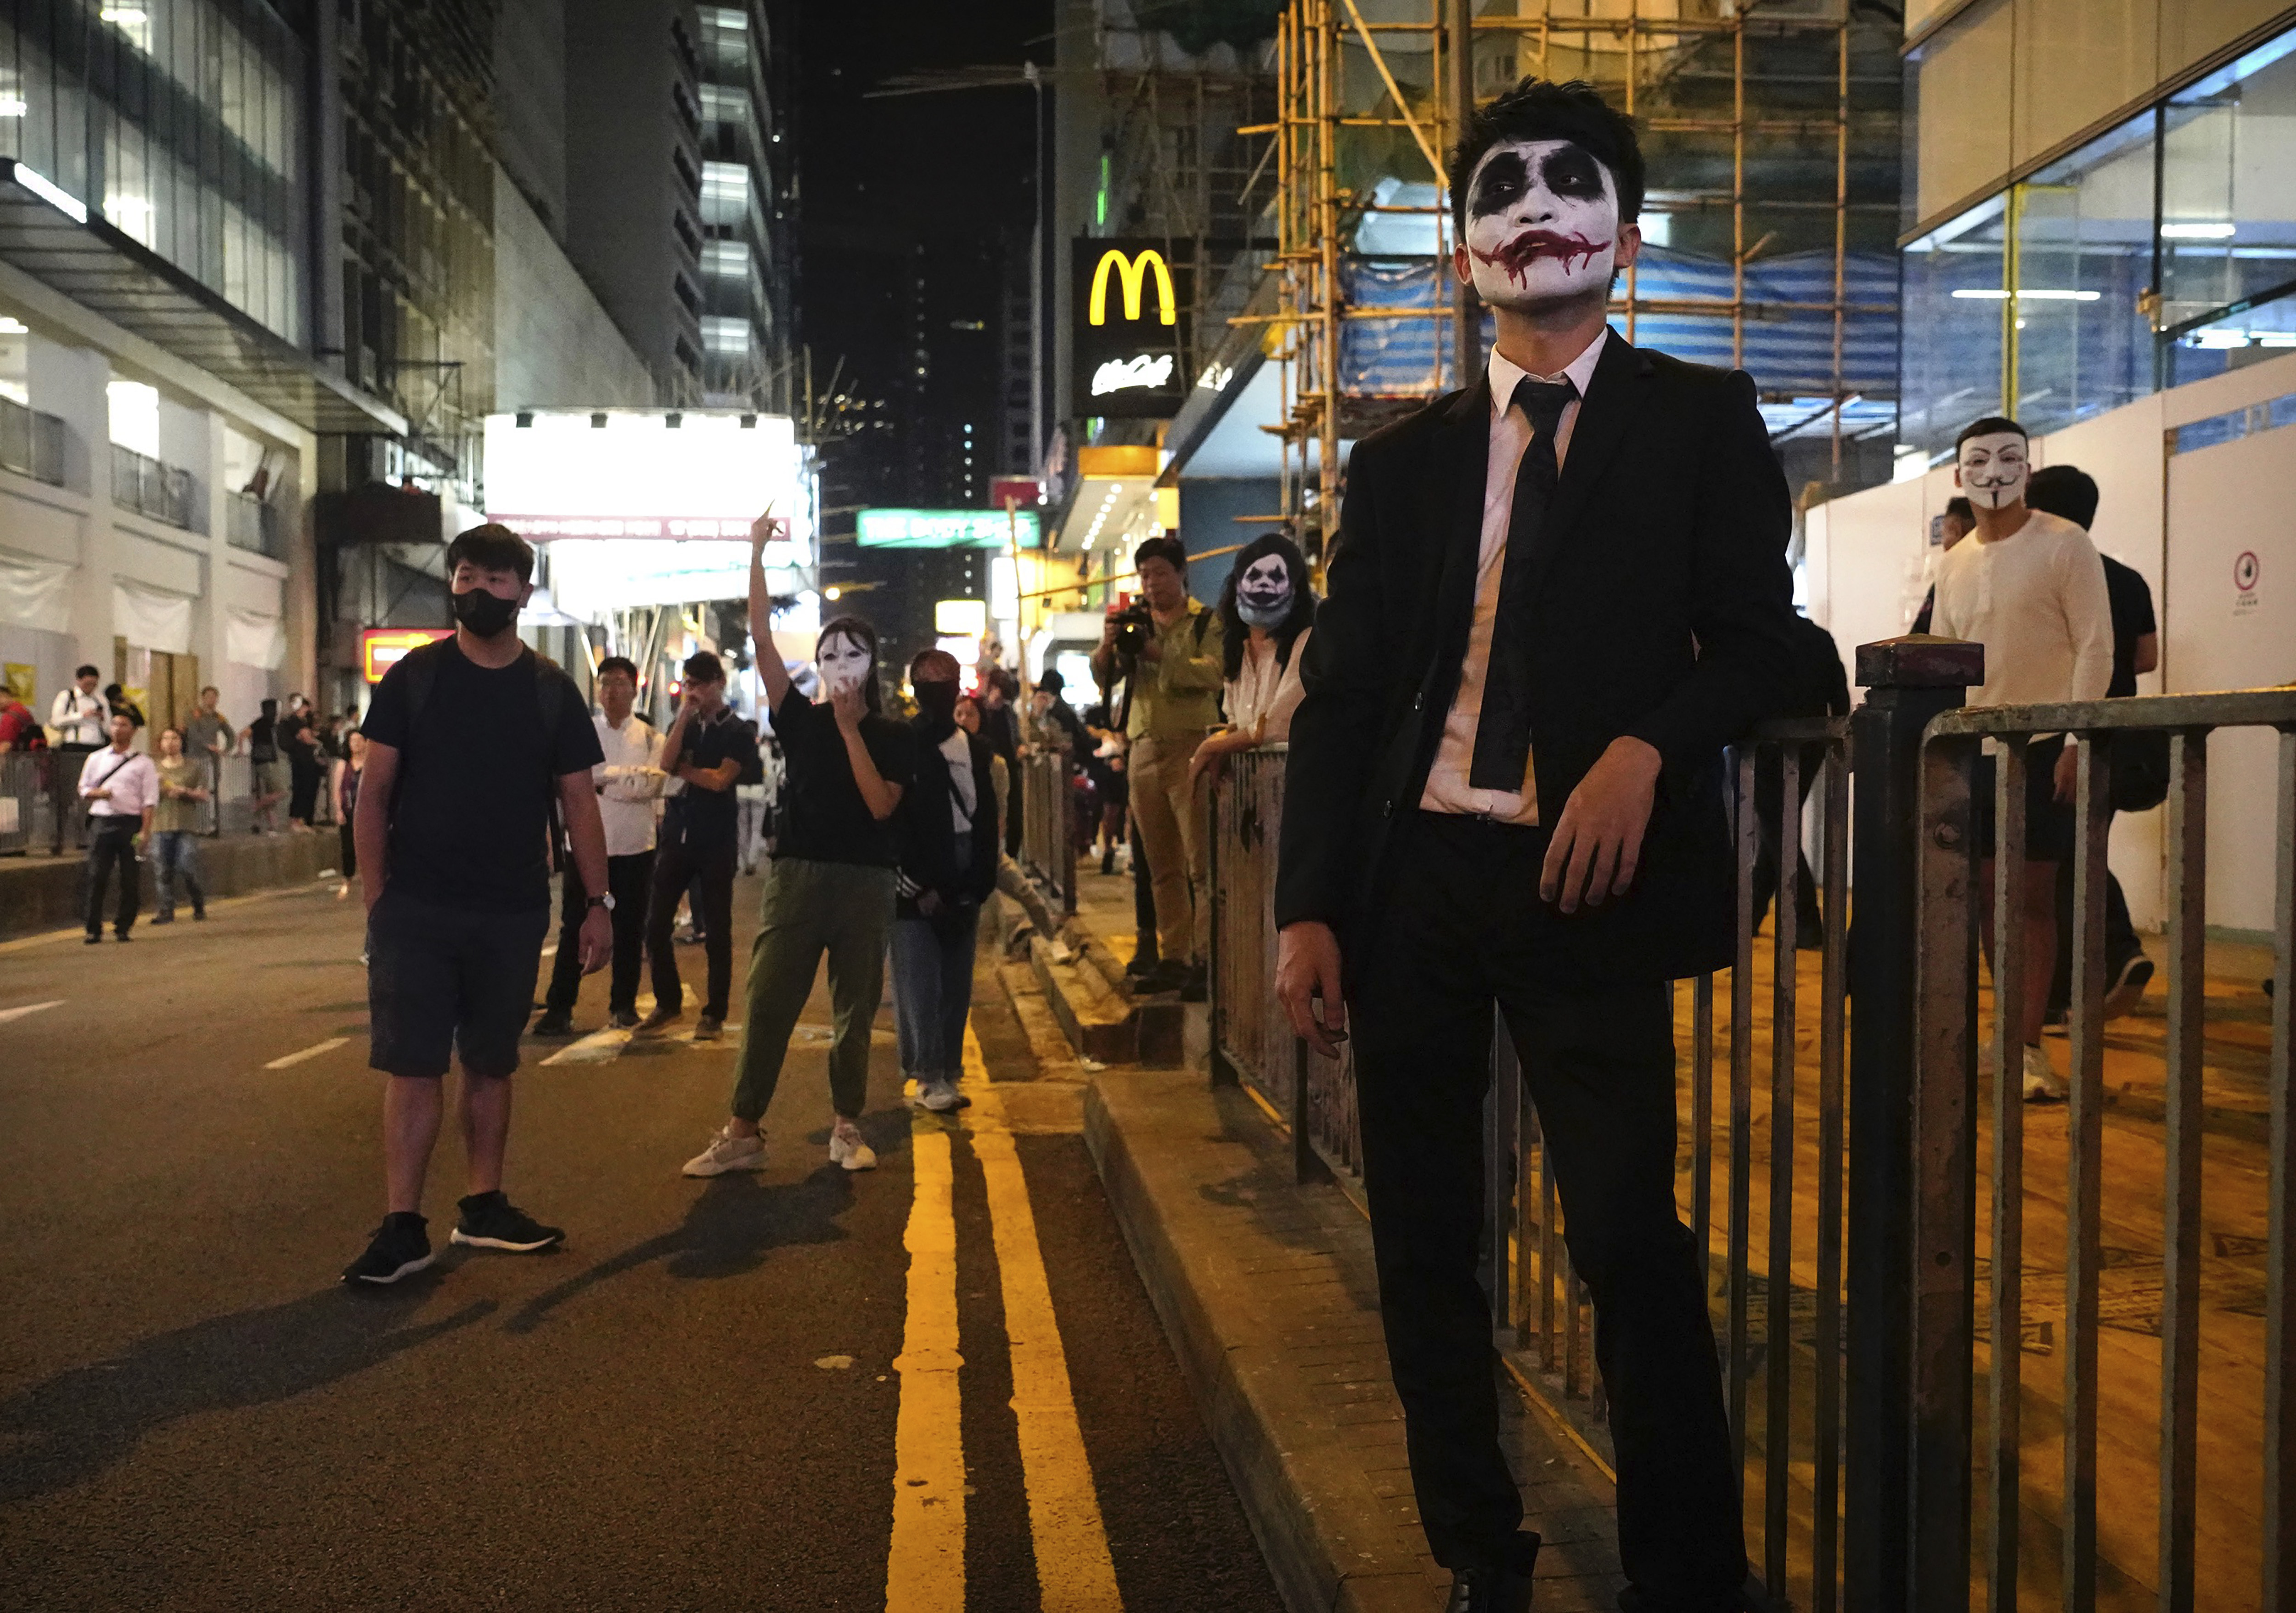 People wearing masks and face paint gather along a street in Hong Kong, Thursday, Oct. 31, 2019. Hong Kong authorities are bracing as pro-democracy protesters urged people on Thursday to celebrate Halloween by wearing masks on a march in defiance of a government ban on face coverings. (AP Photo/Vincent Yu)